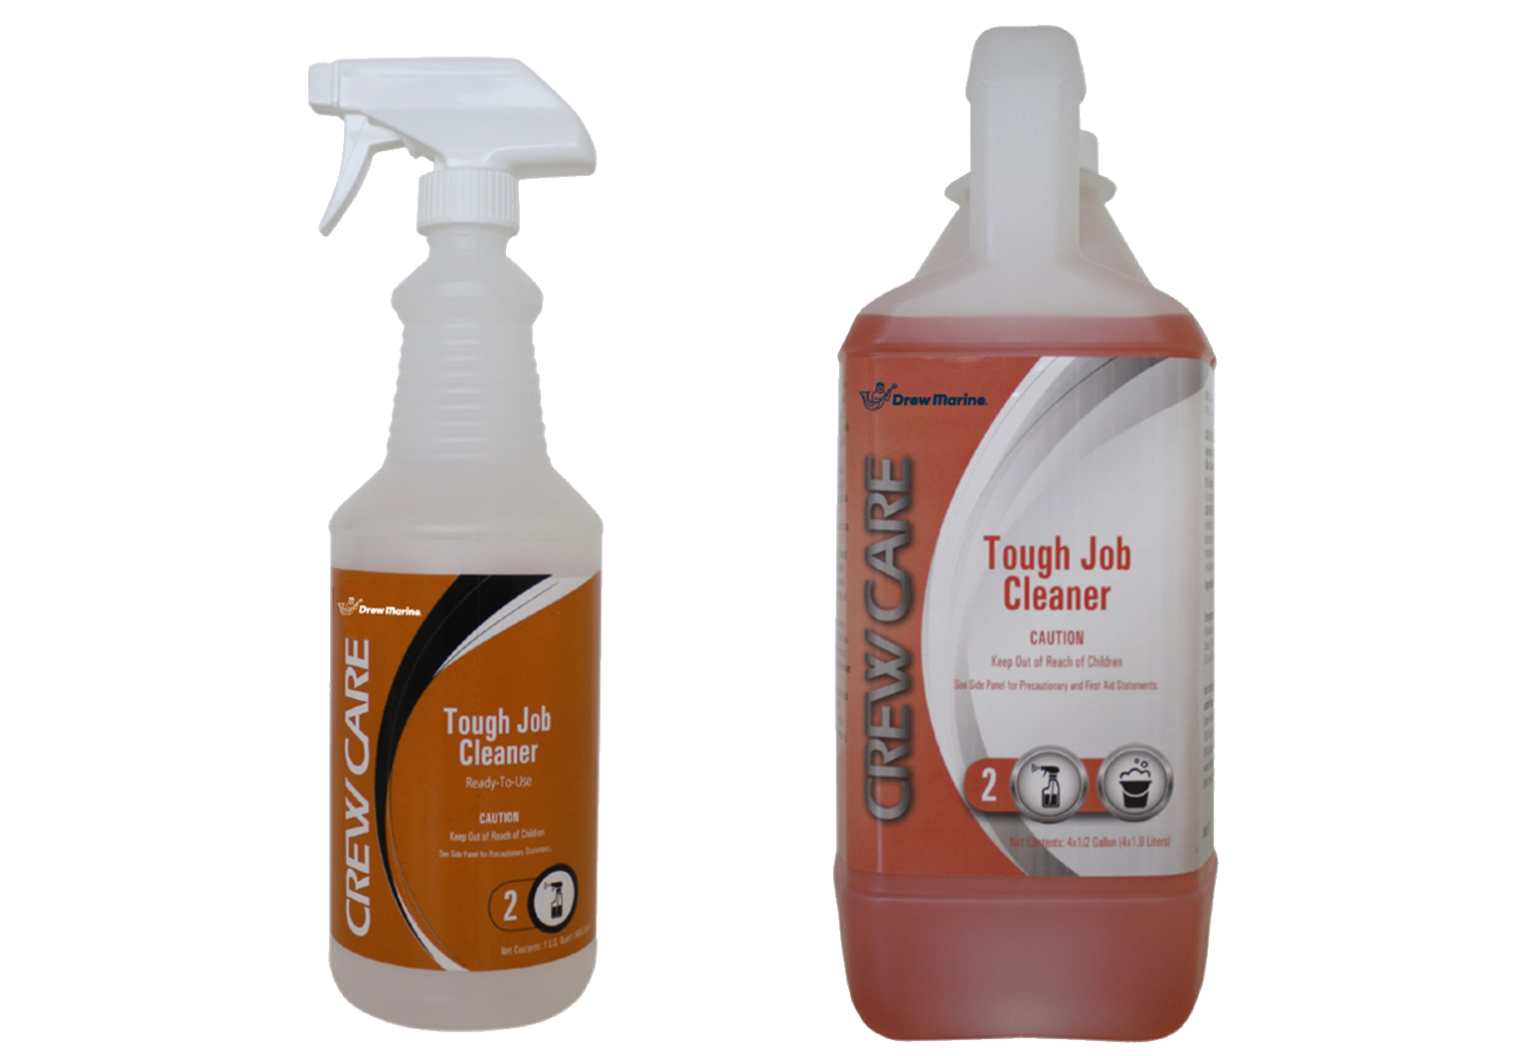 Crew Care Tough Job Cleaner from Drew Marine is Bio-based, Non-toxic and Butyl-free.